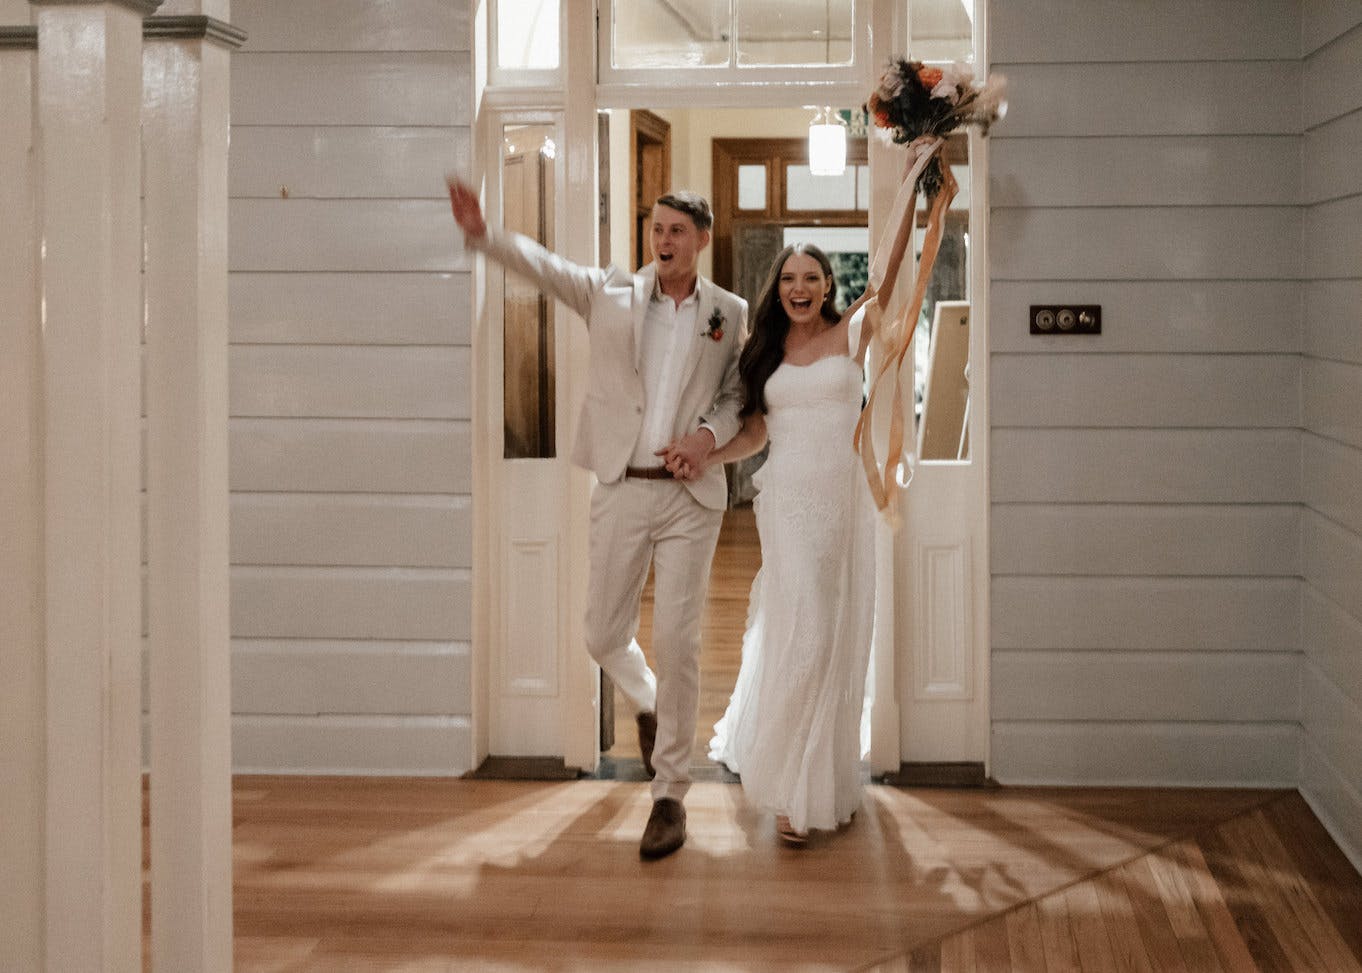 A joyful bride and groom are walking hand in hand through a doorway. The groom, in a light-colored suit, waves happily, while the bride, in a white gown, holds a bouquet up high with ribbons flowing. They are smiling and appear to be celebrating their wedding.